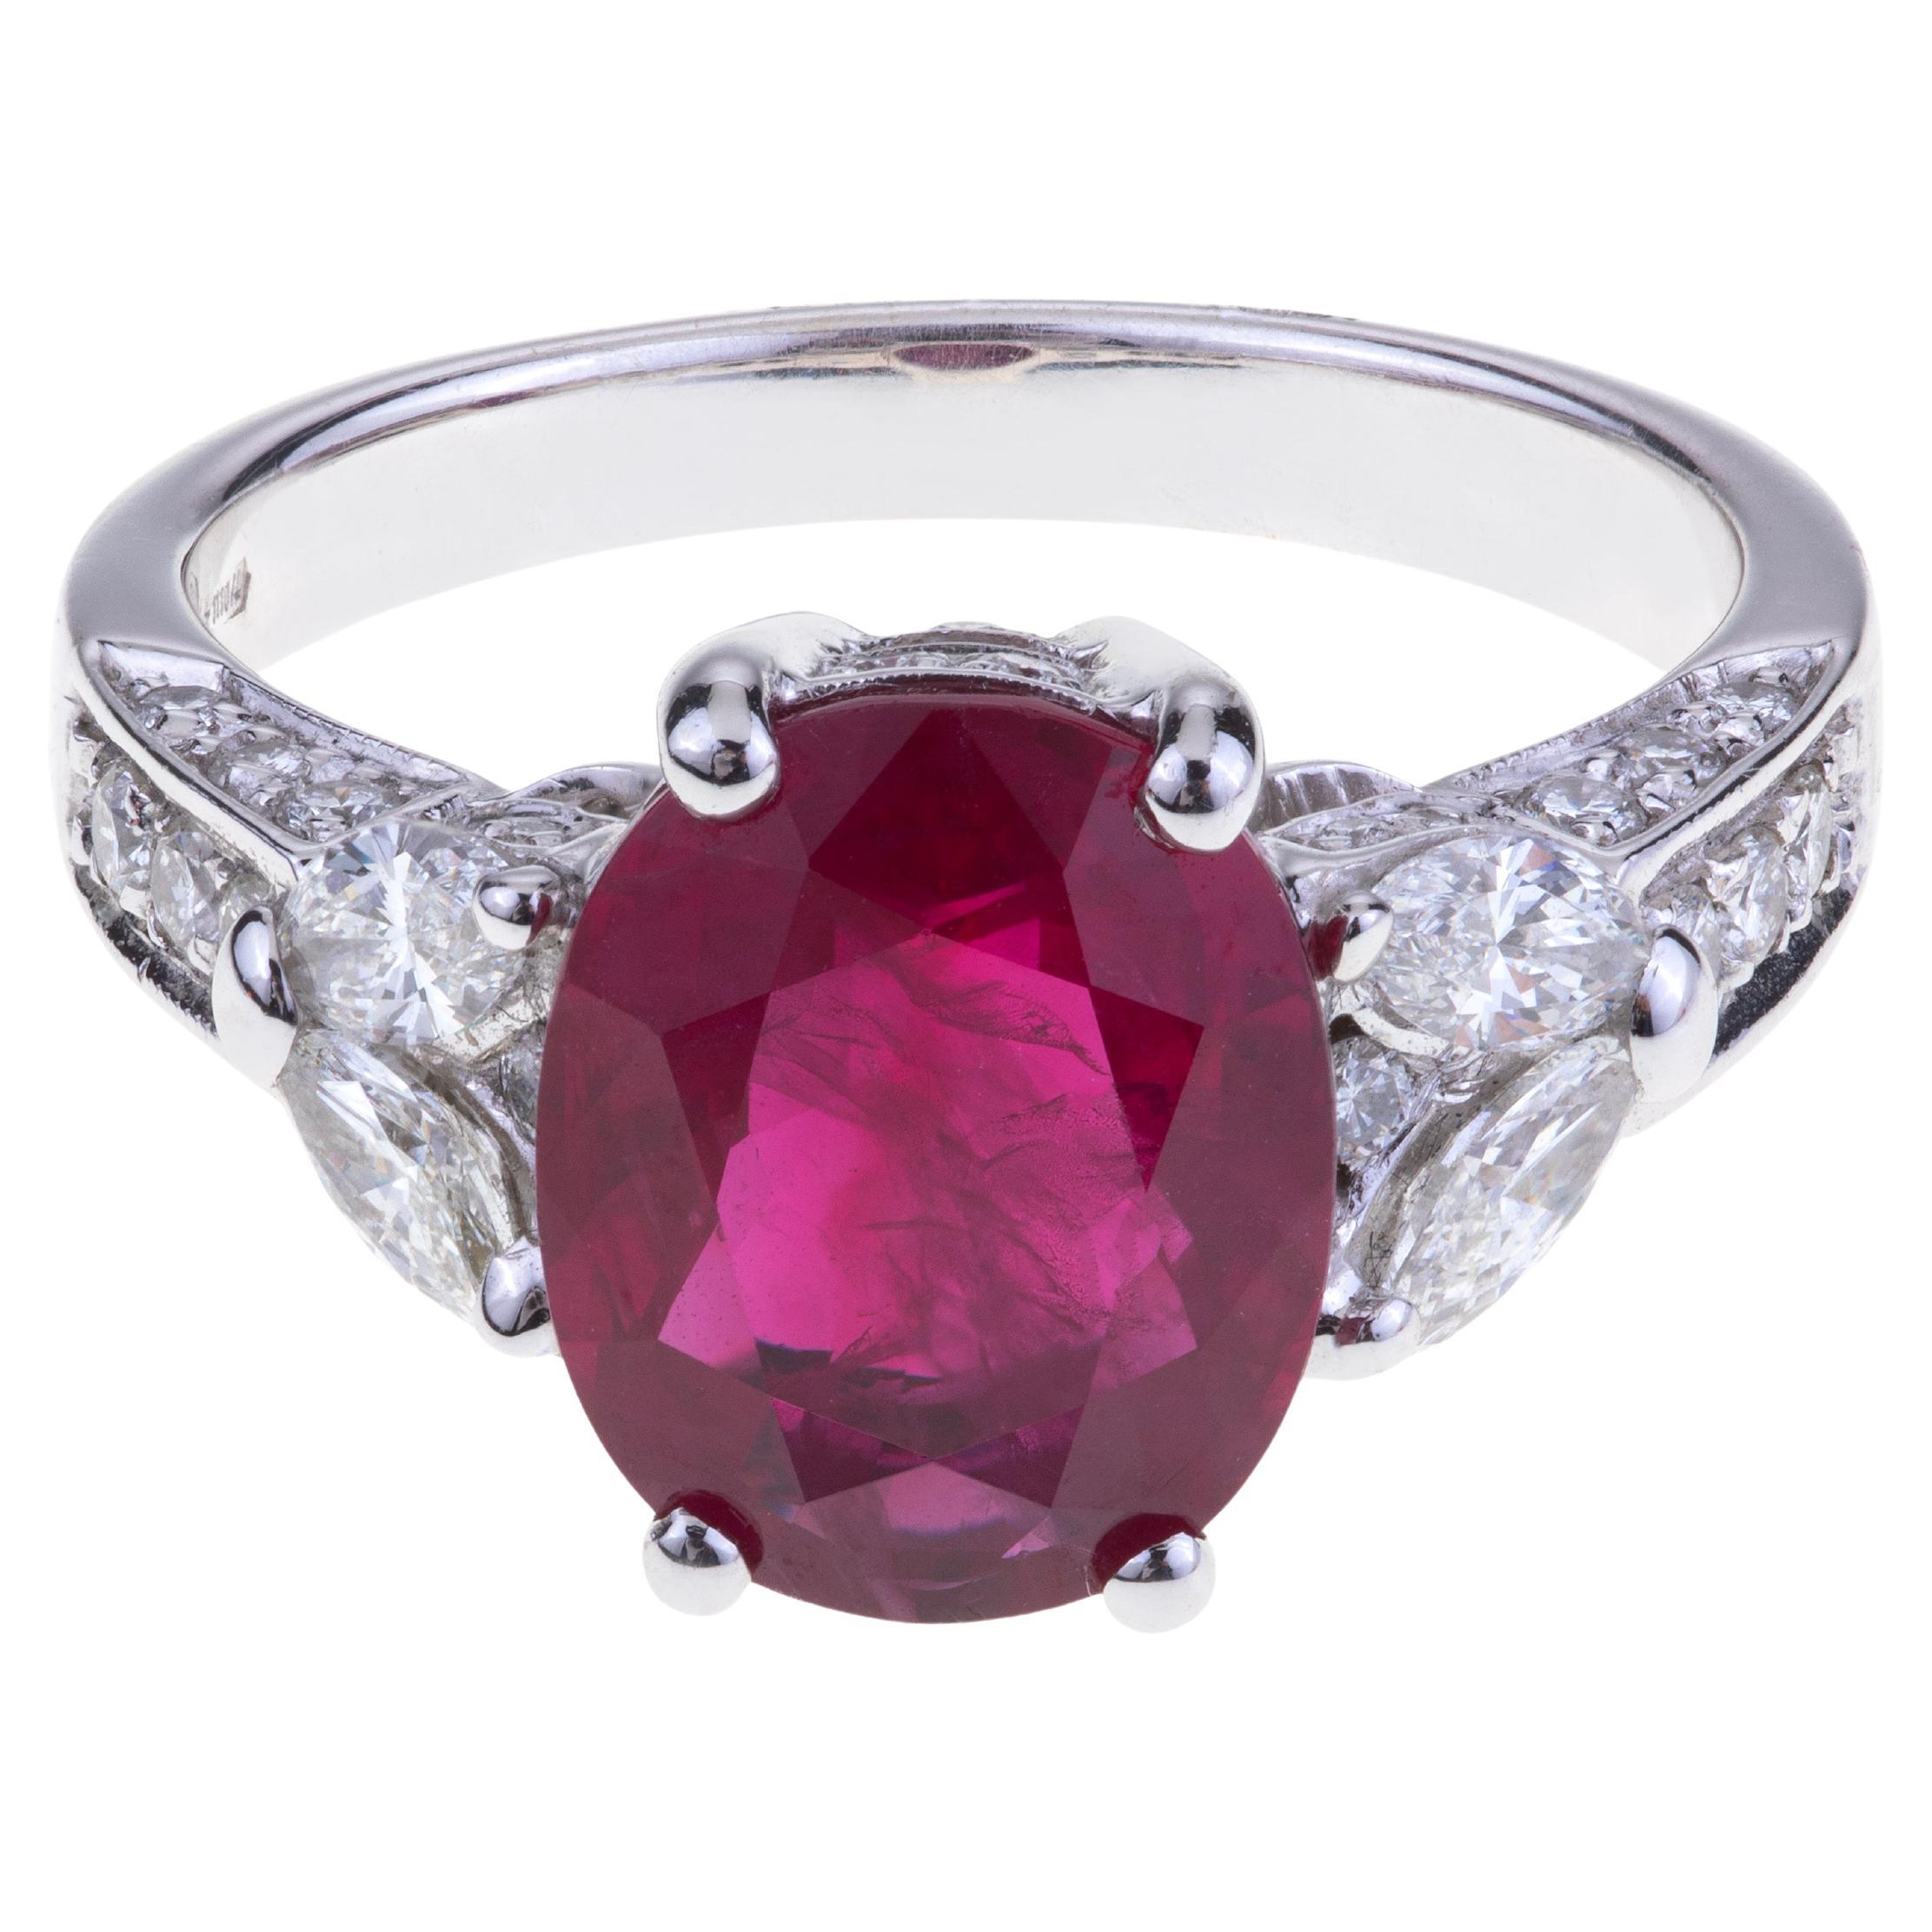 Stunning Oval Ruby Ring ct. 4.10 with Diamonds. Unique Stone. For Sale